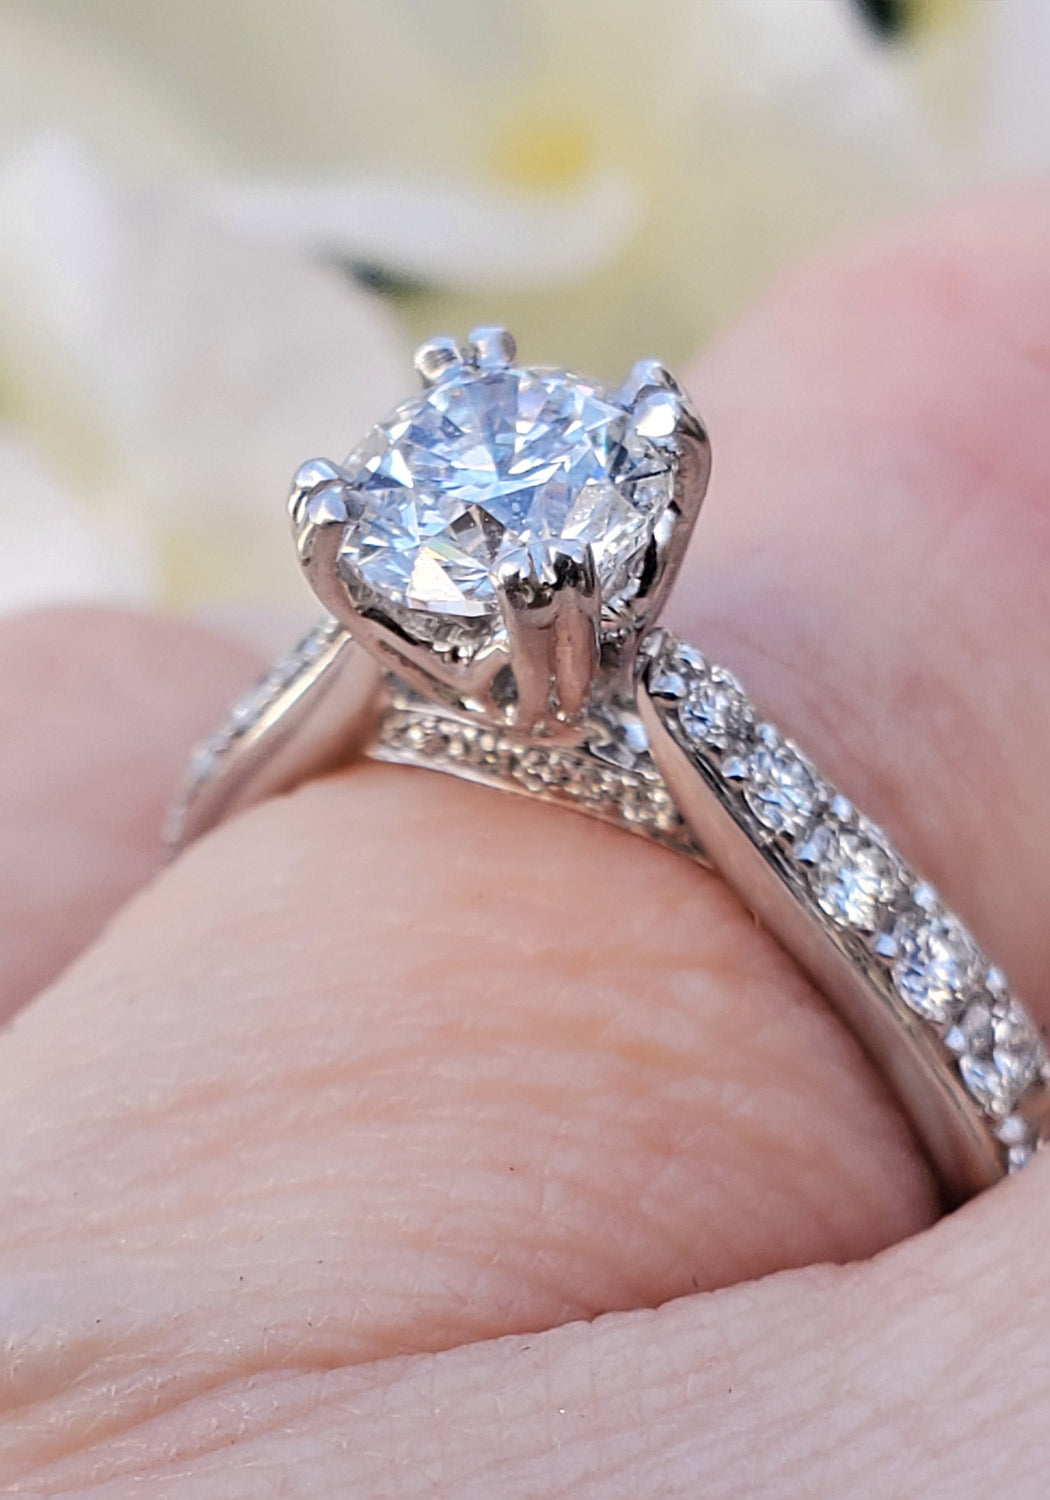 Beautifully Raised solitaire diamond ring at Oster Jewelers